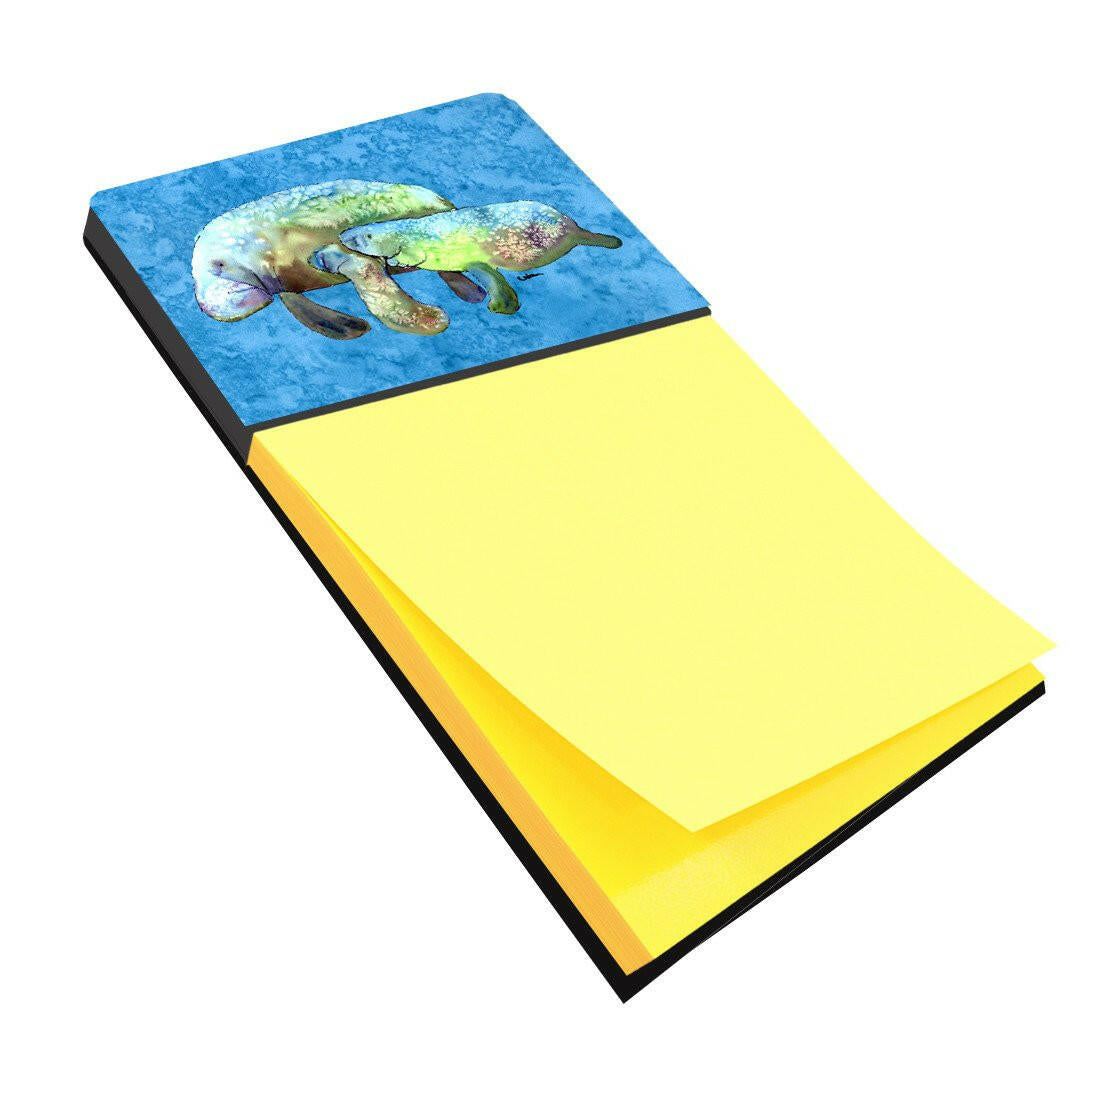 Manatee Refiillable Sticky Note Holder or Postit Note Dispenser 8660SN by Caroline's Treasures